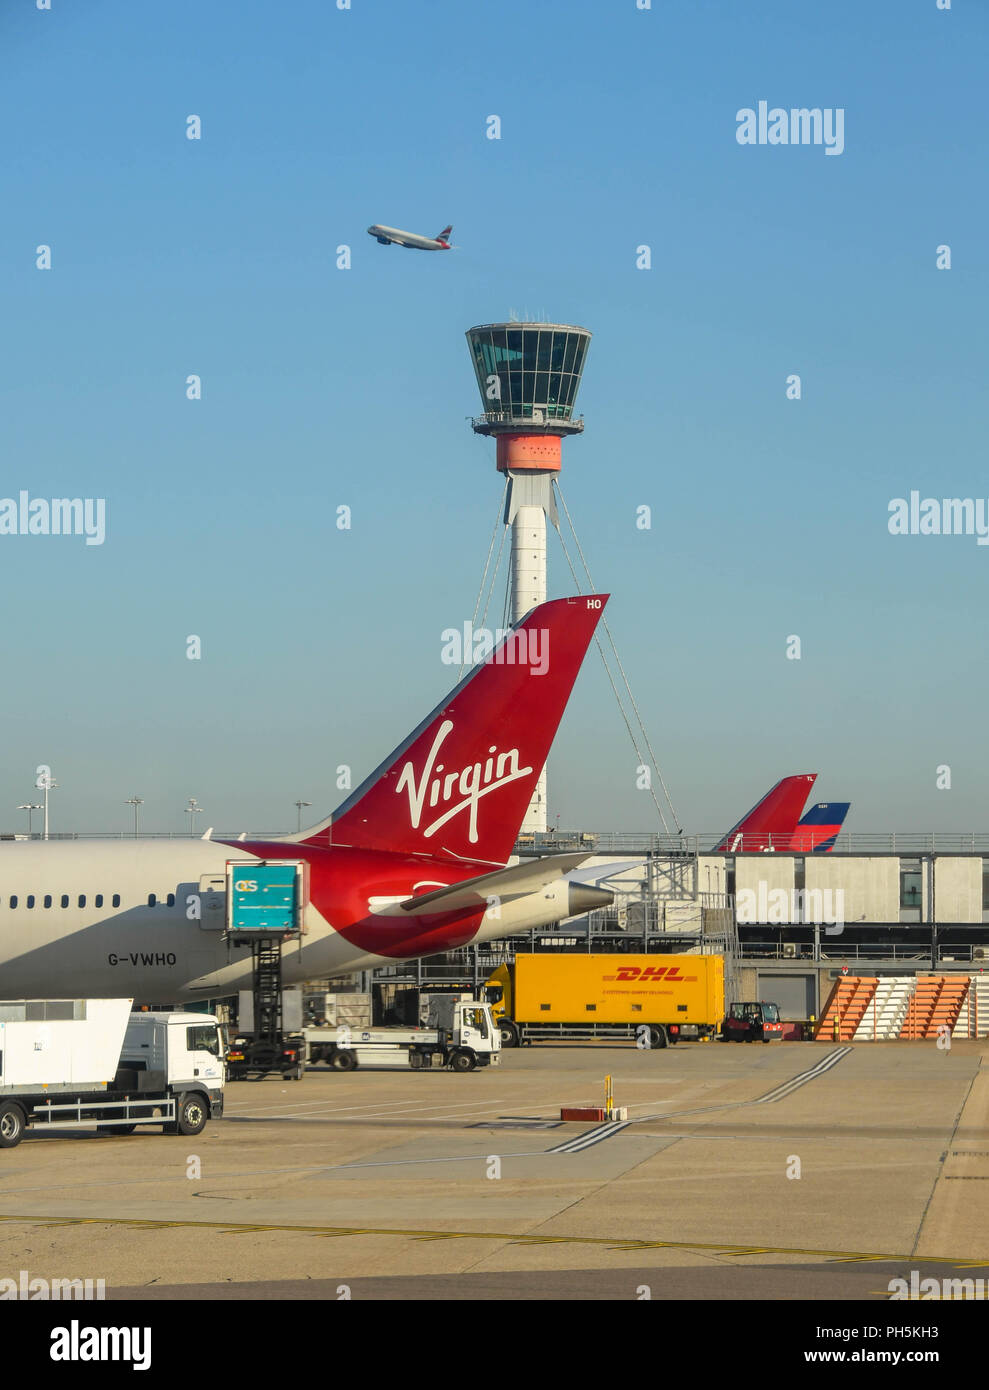 Tail fin of a Virgin Atlantic jet at London Heathrow airport. The airport's control tower and a jet taking off are in the background Stock Photo